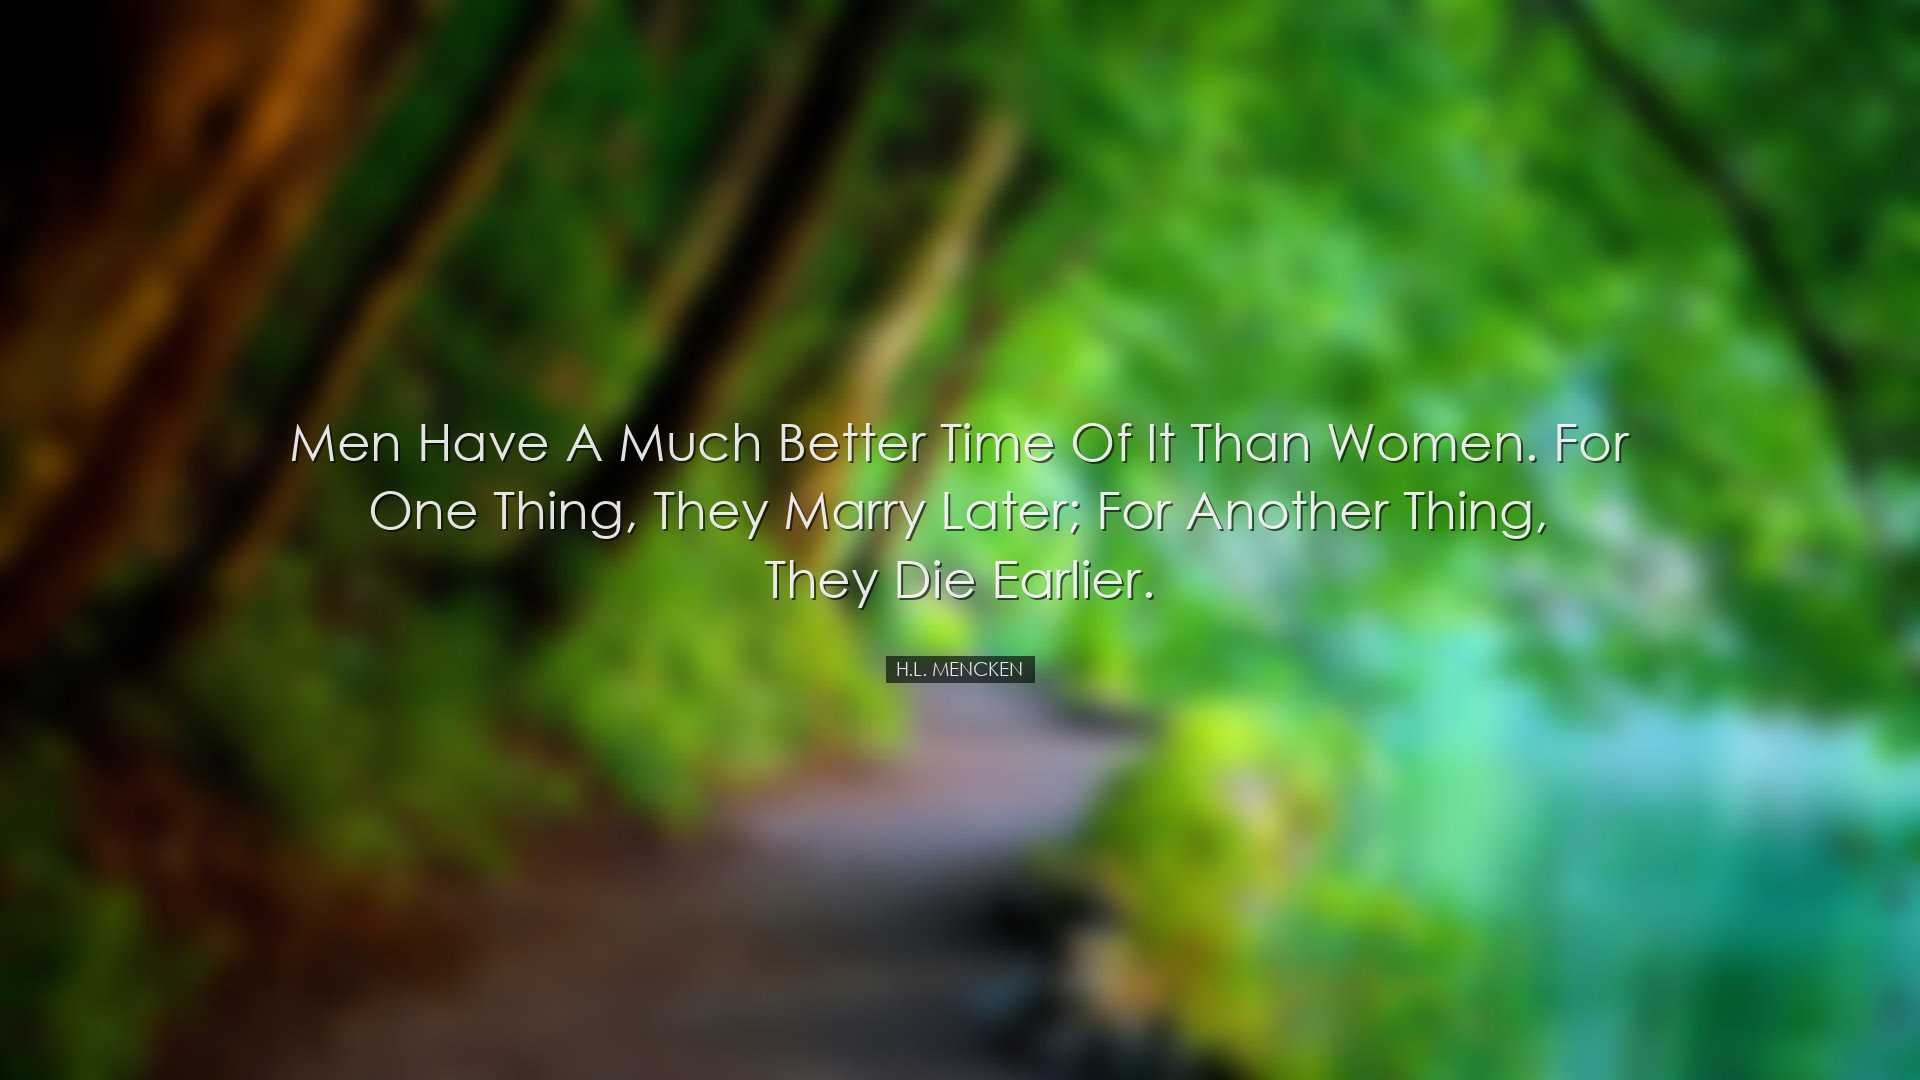 Men have a much better time of it than women. For one thing, they